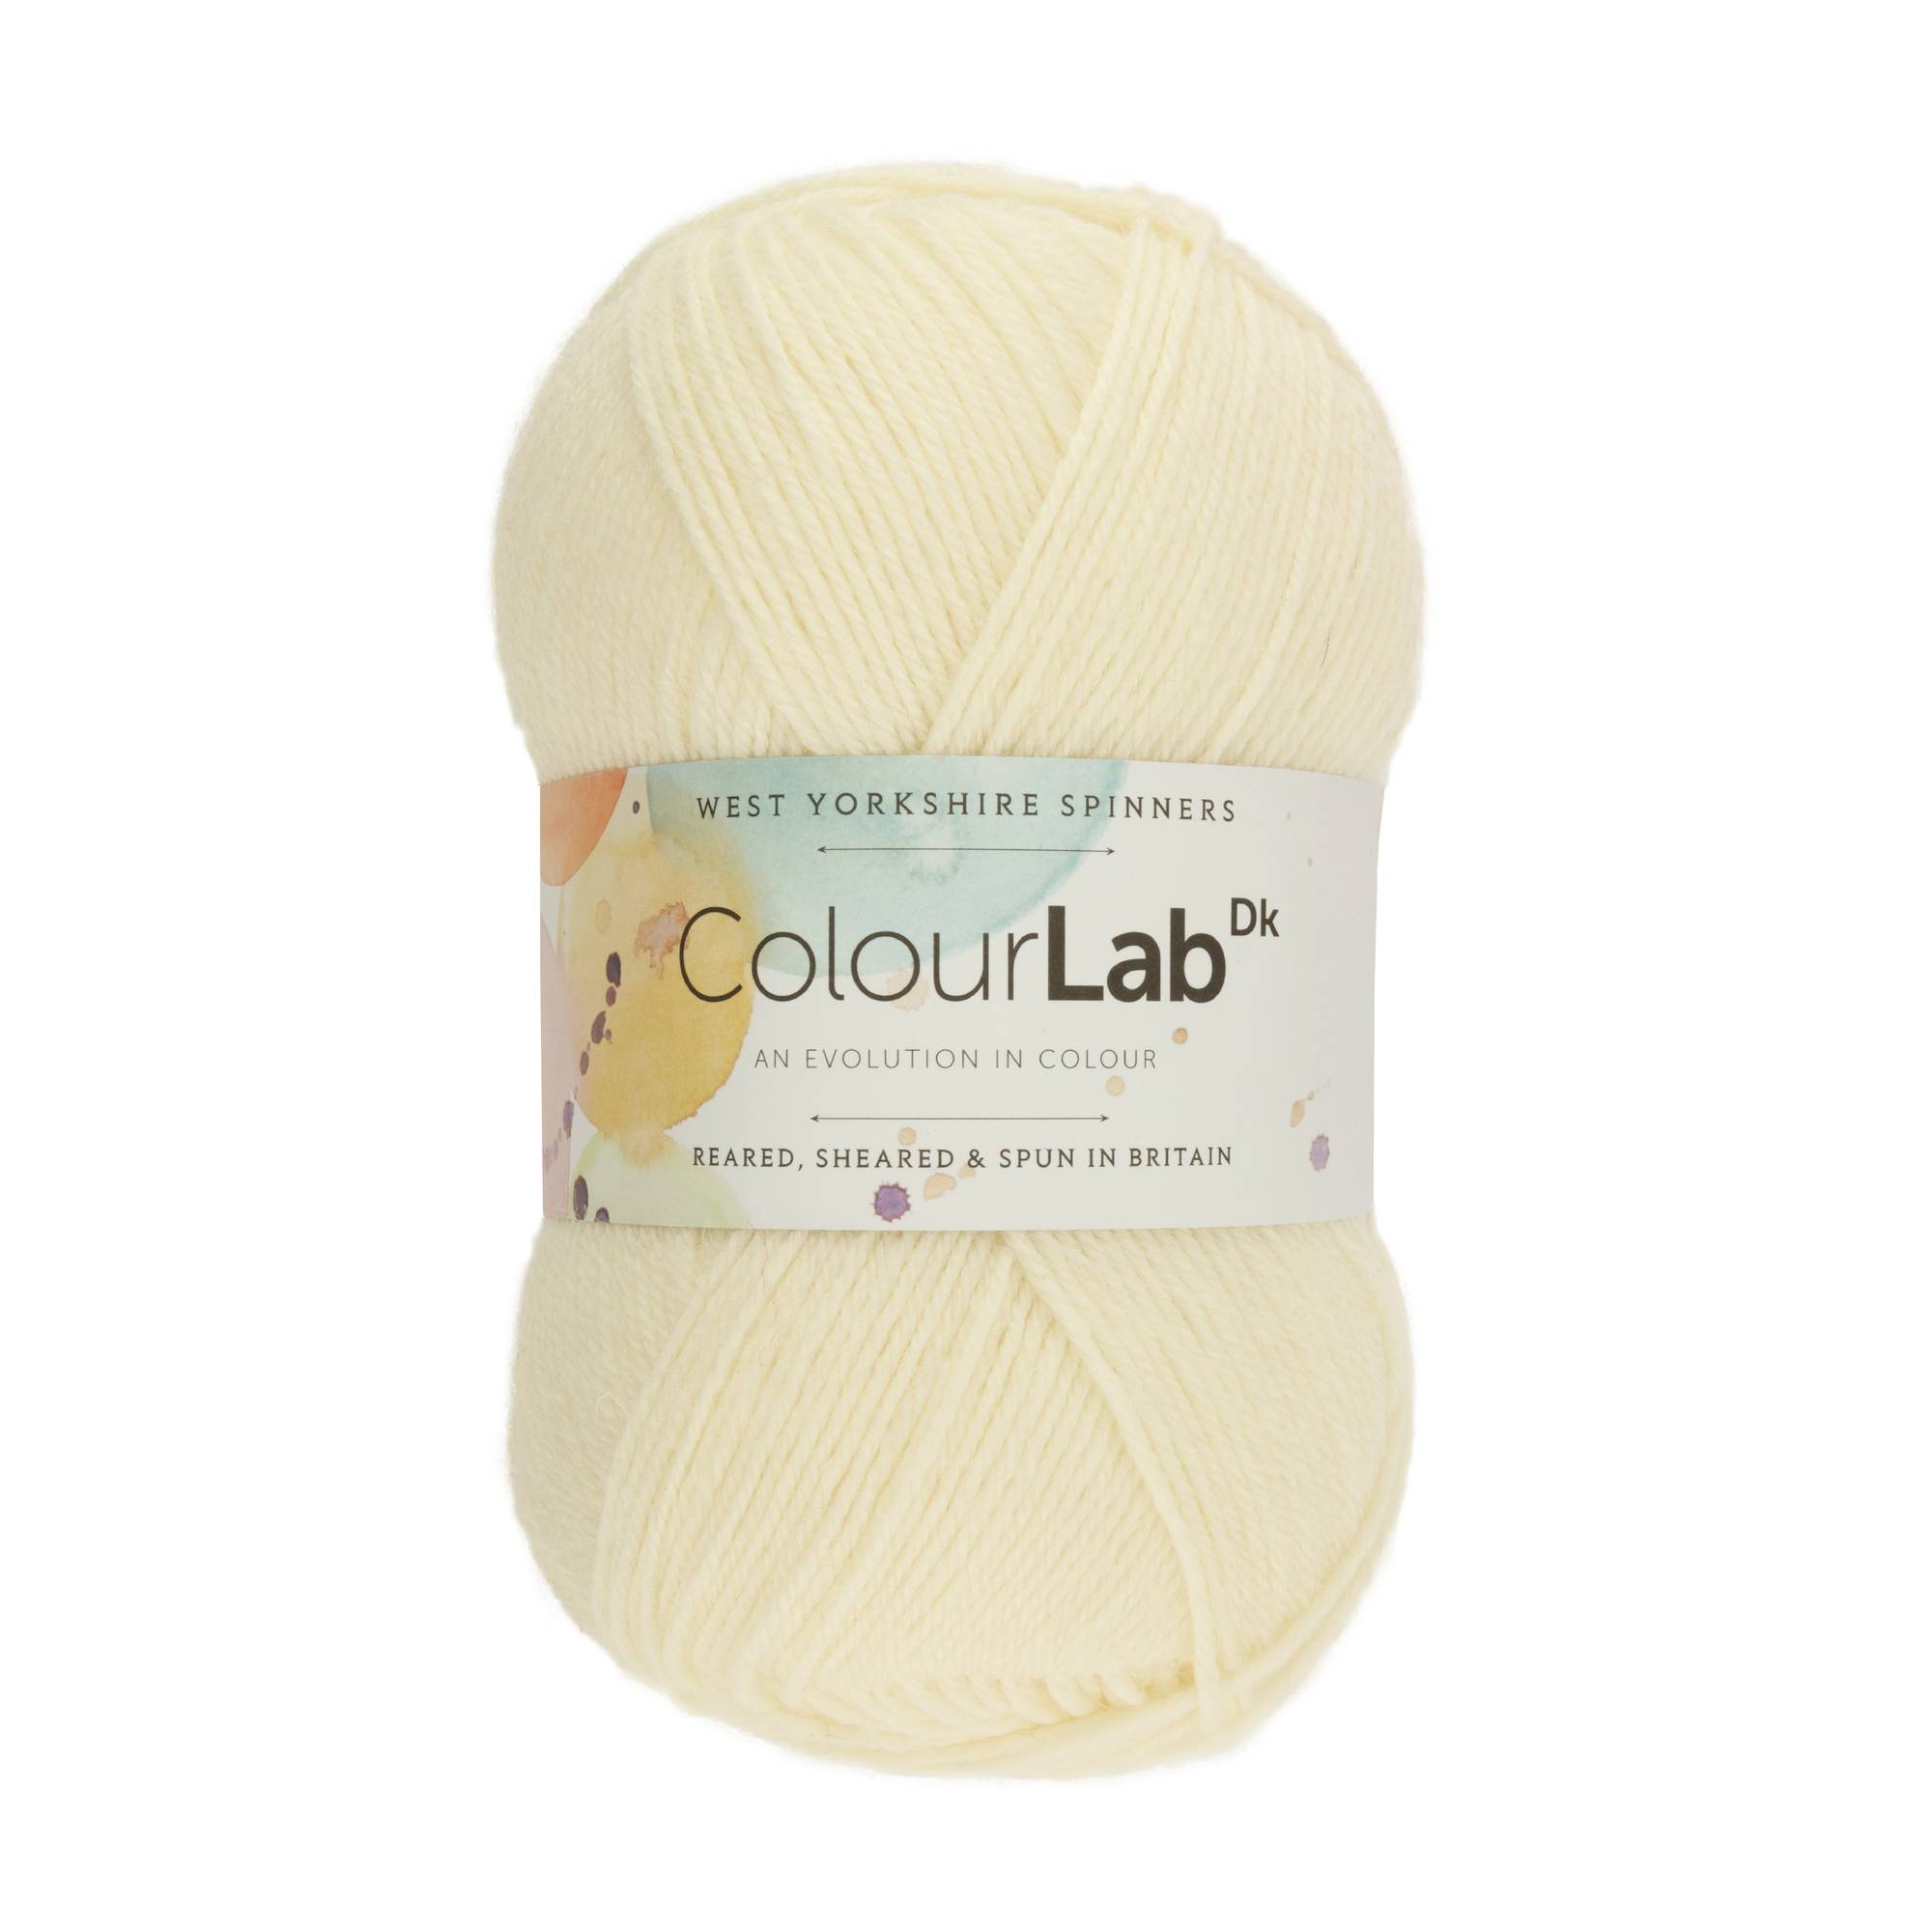 West Yorkshire Spinners Arctic White ColourLab DK 100g